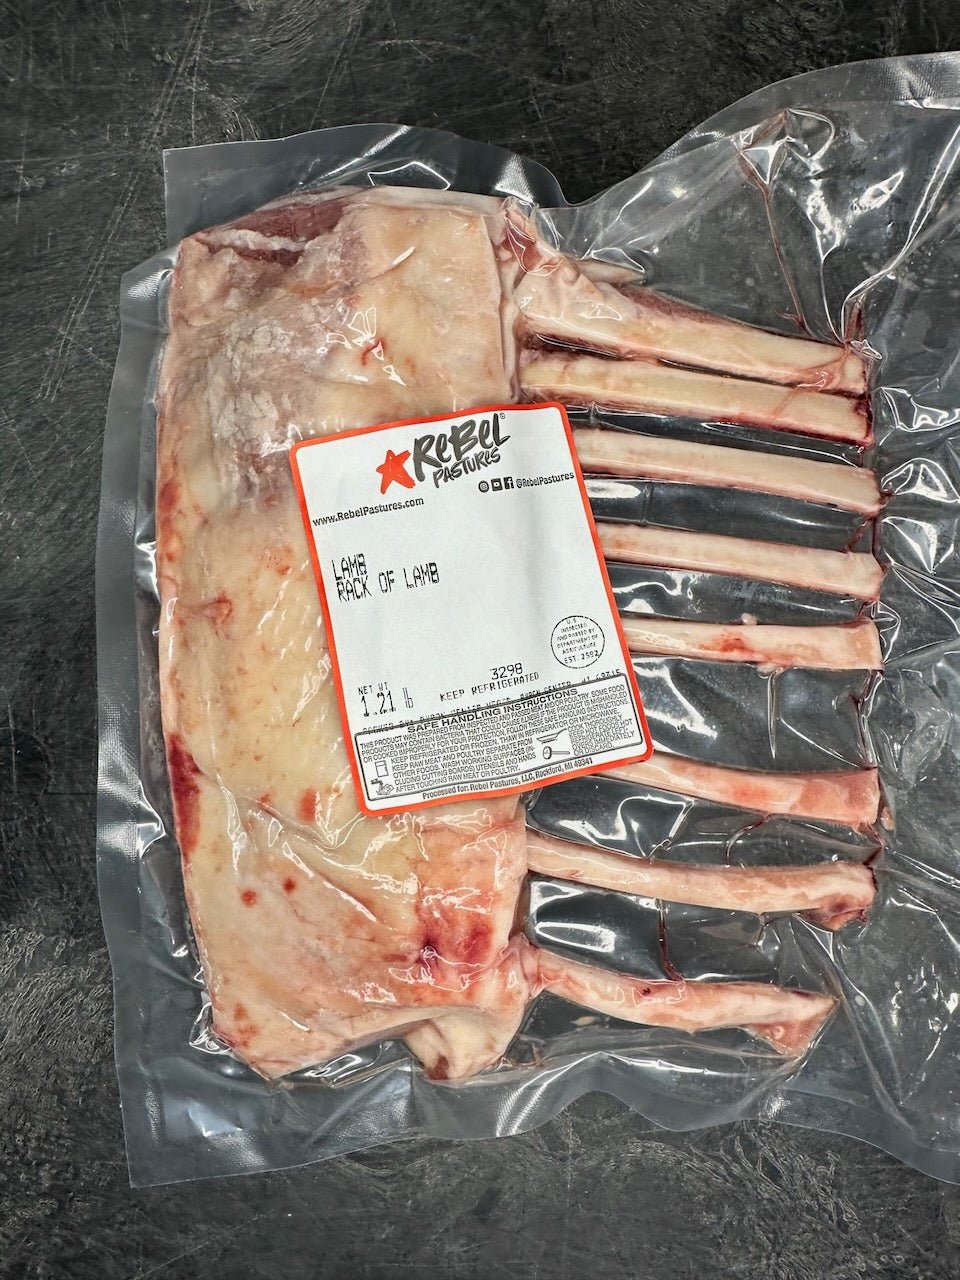 Grassfed Lamb - Grassfed "Frenched" Rack of Lamb (1.15lbs avg) - Rebel Pastures